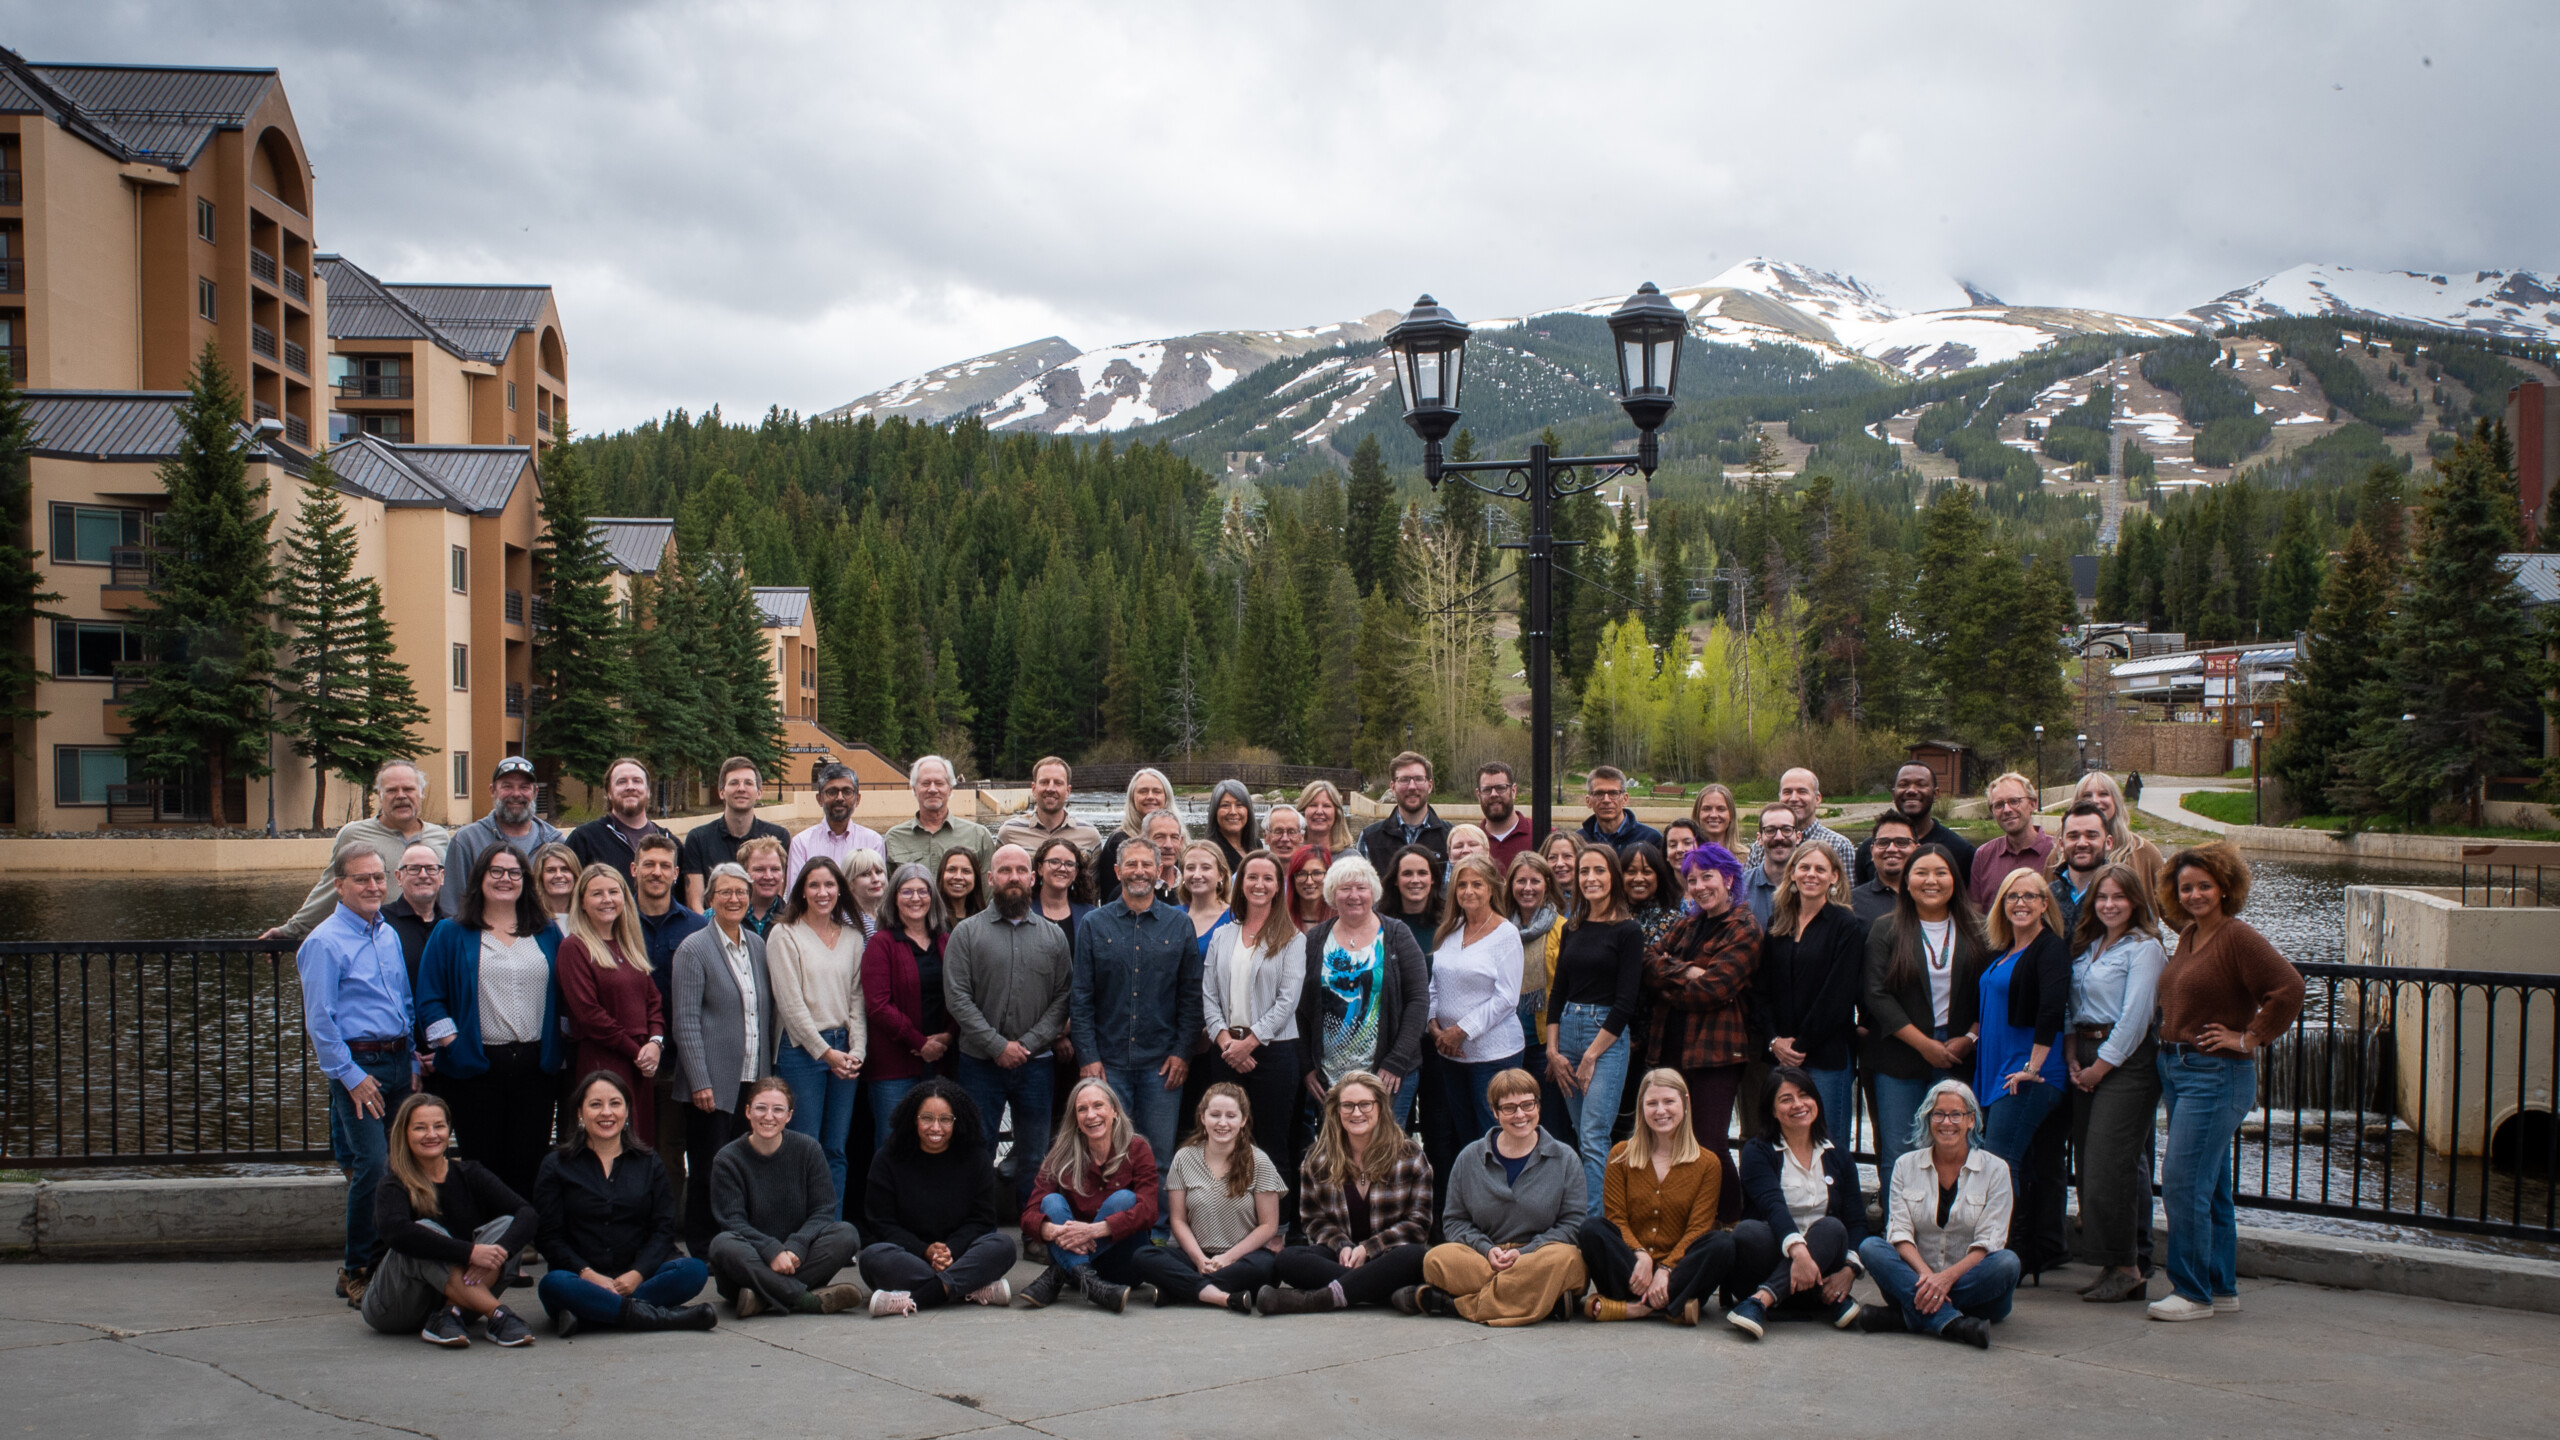 WRA staff members pose in front of mountains at the 2023 Breckenridge Staff Retreat